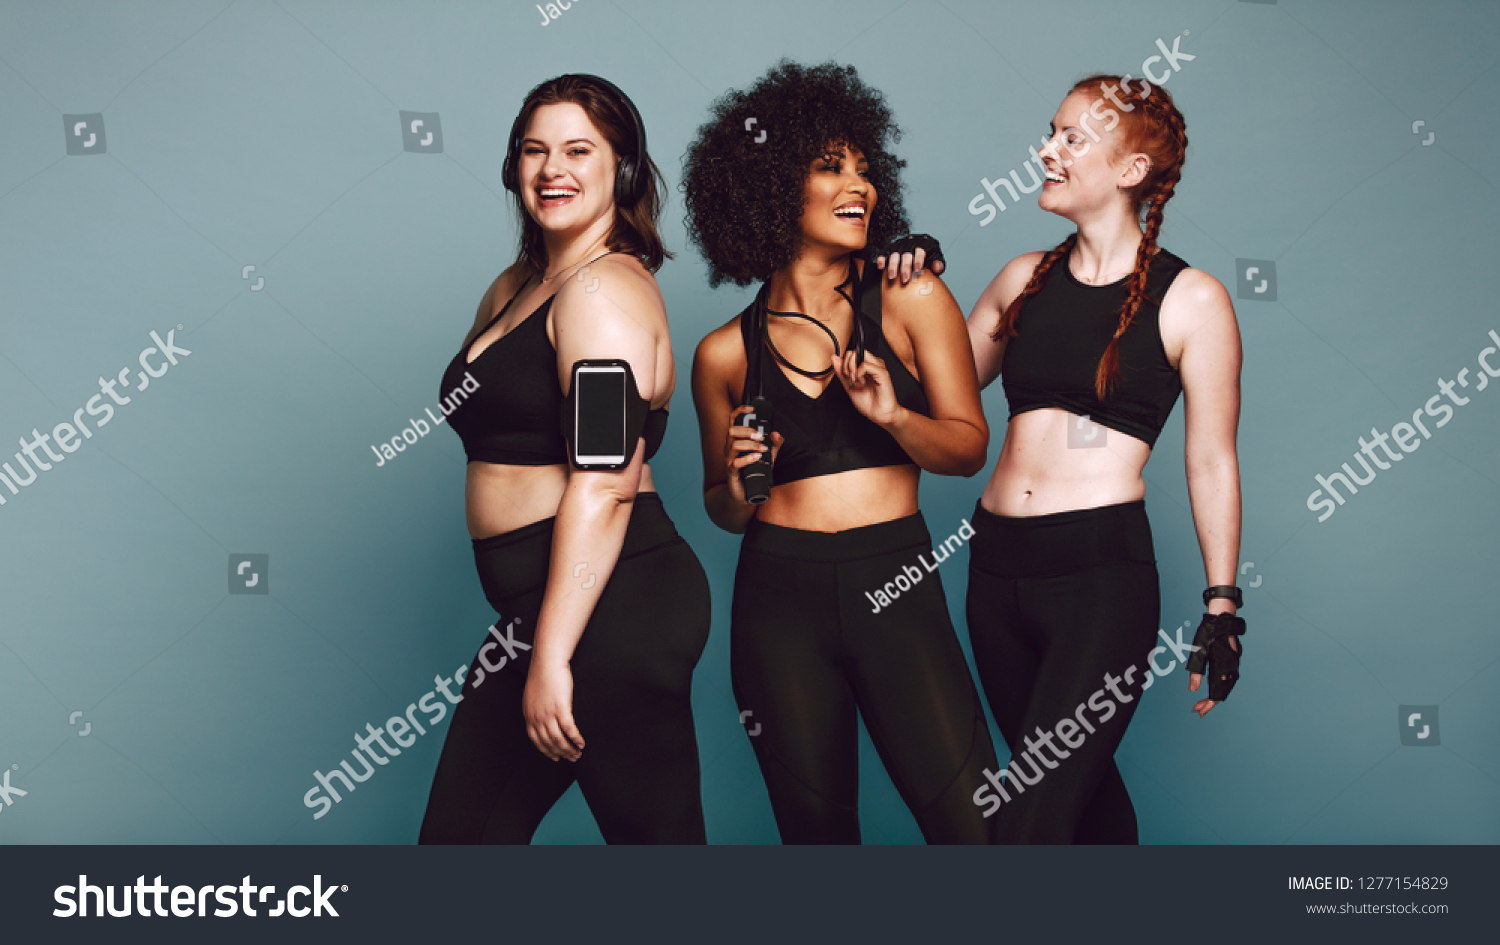 Multi-ethnic group of women together against grey background and smiling. Diverse group females in sportswear after workout. #1277154829